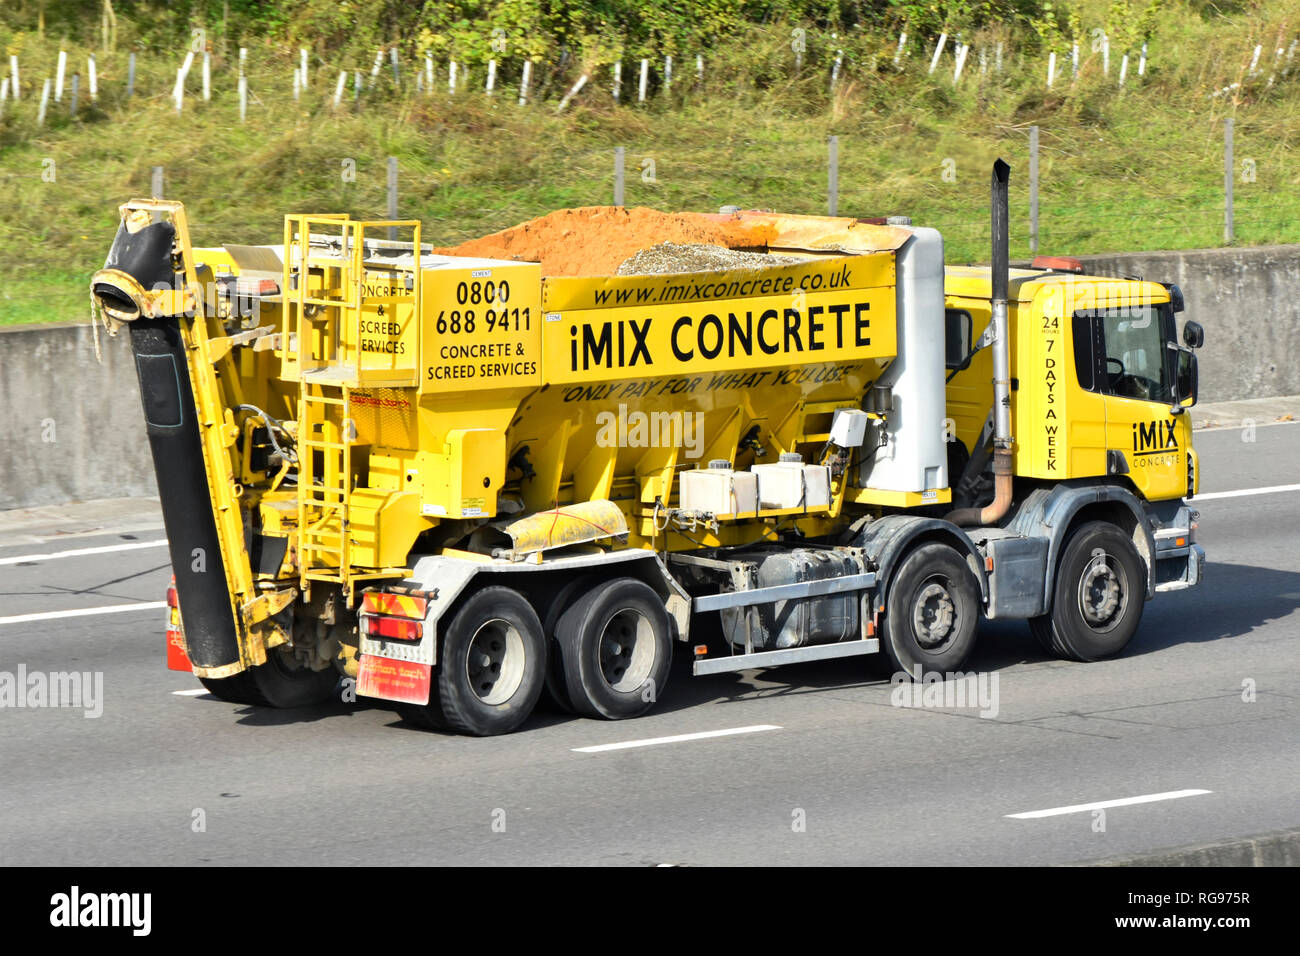 Uk Cement Lorry Stock Photos & Uk Cement Lorry Stock Images - Alamy